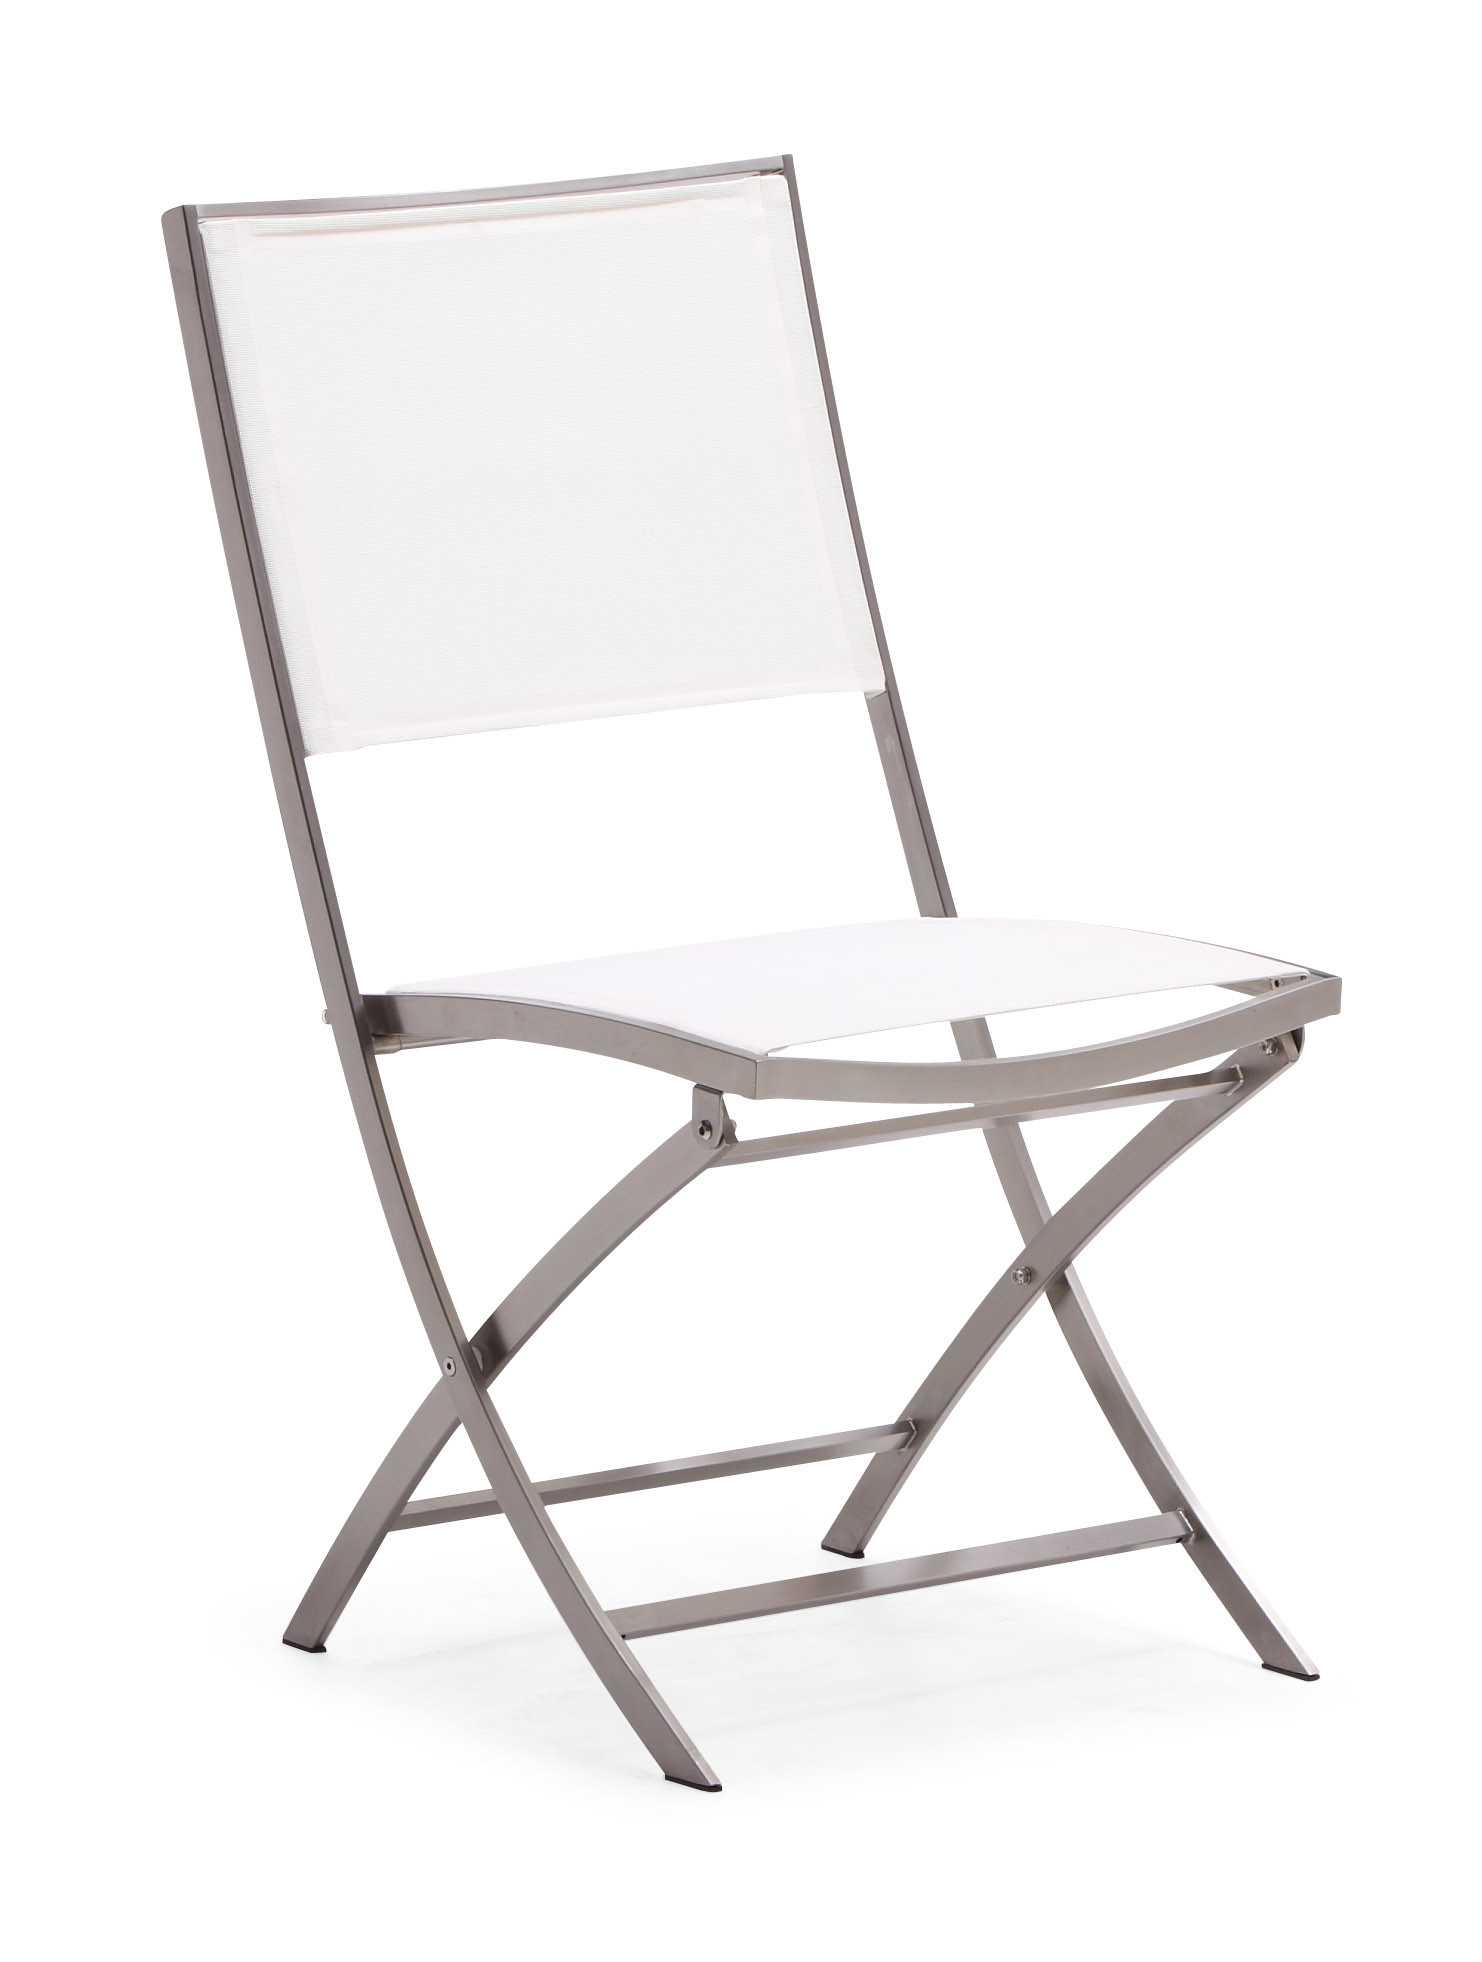 Patio folding chair stainless steel garden chair (Y064B)